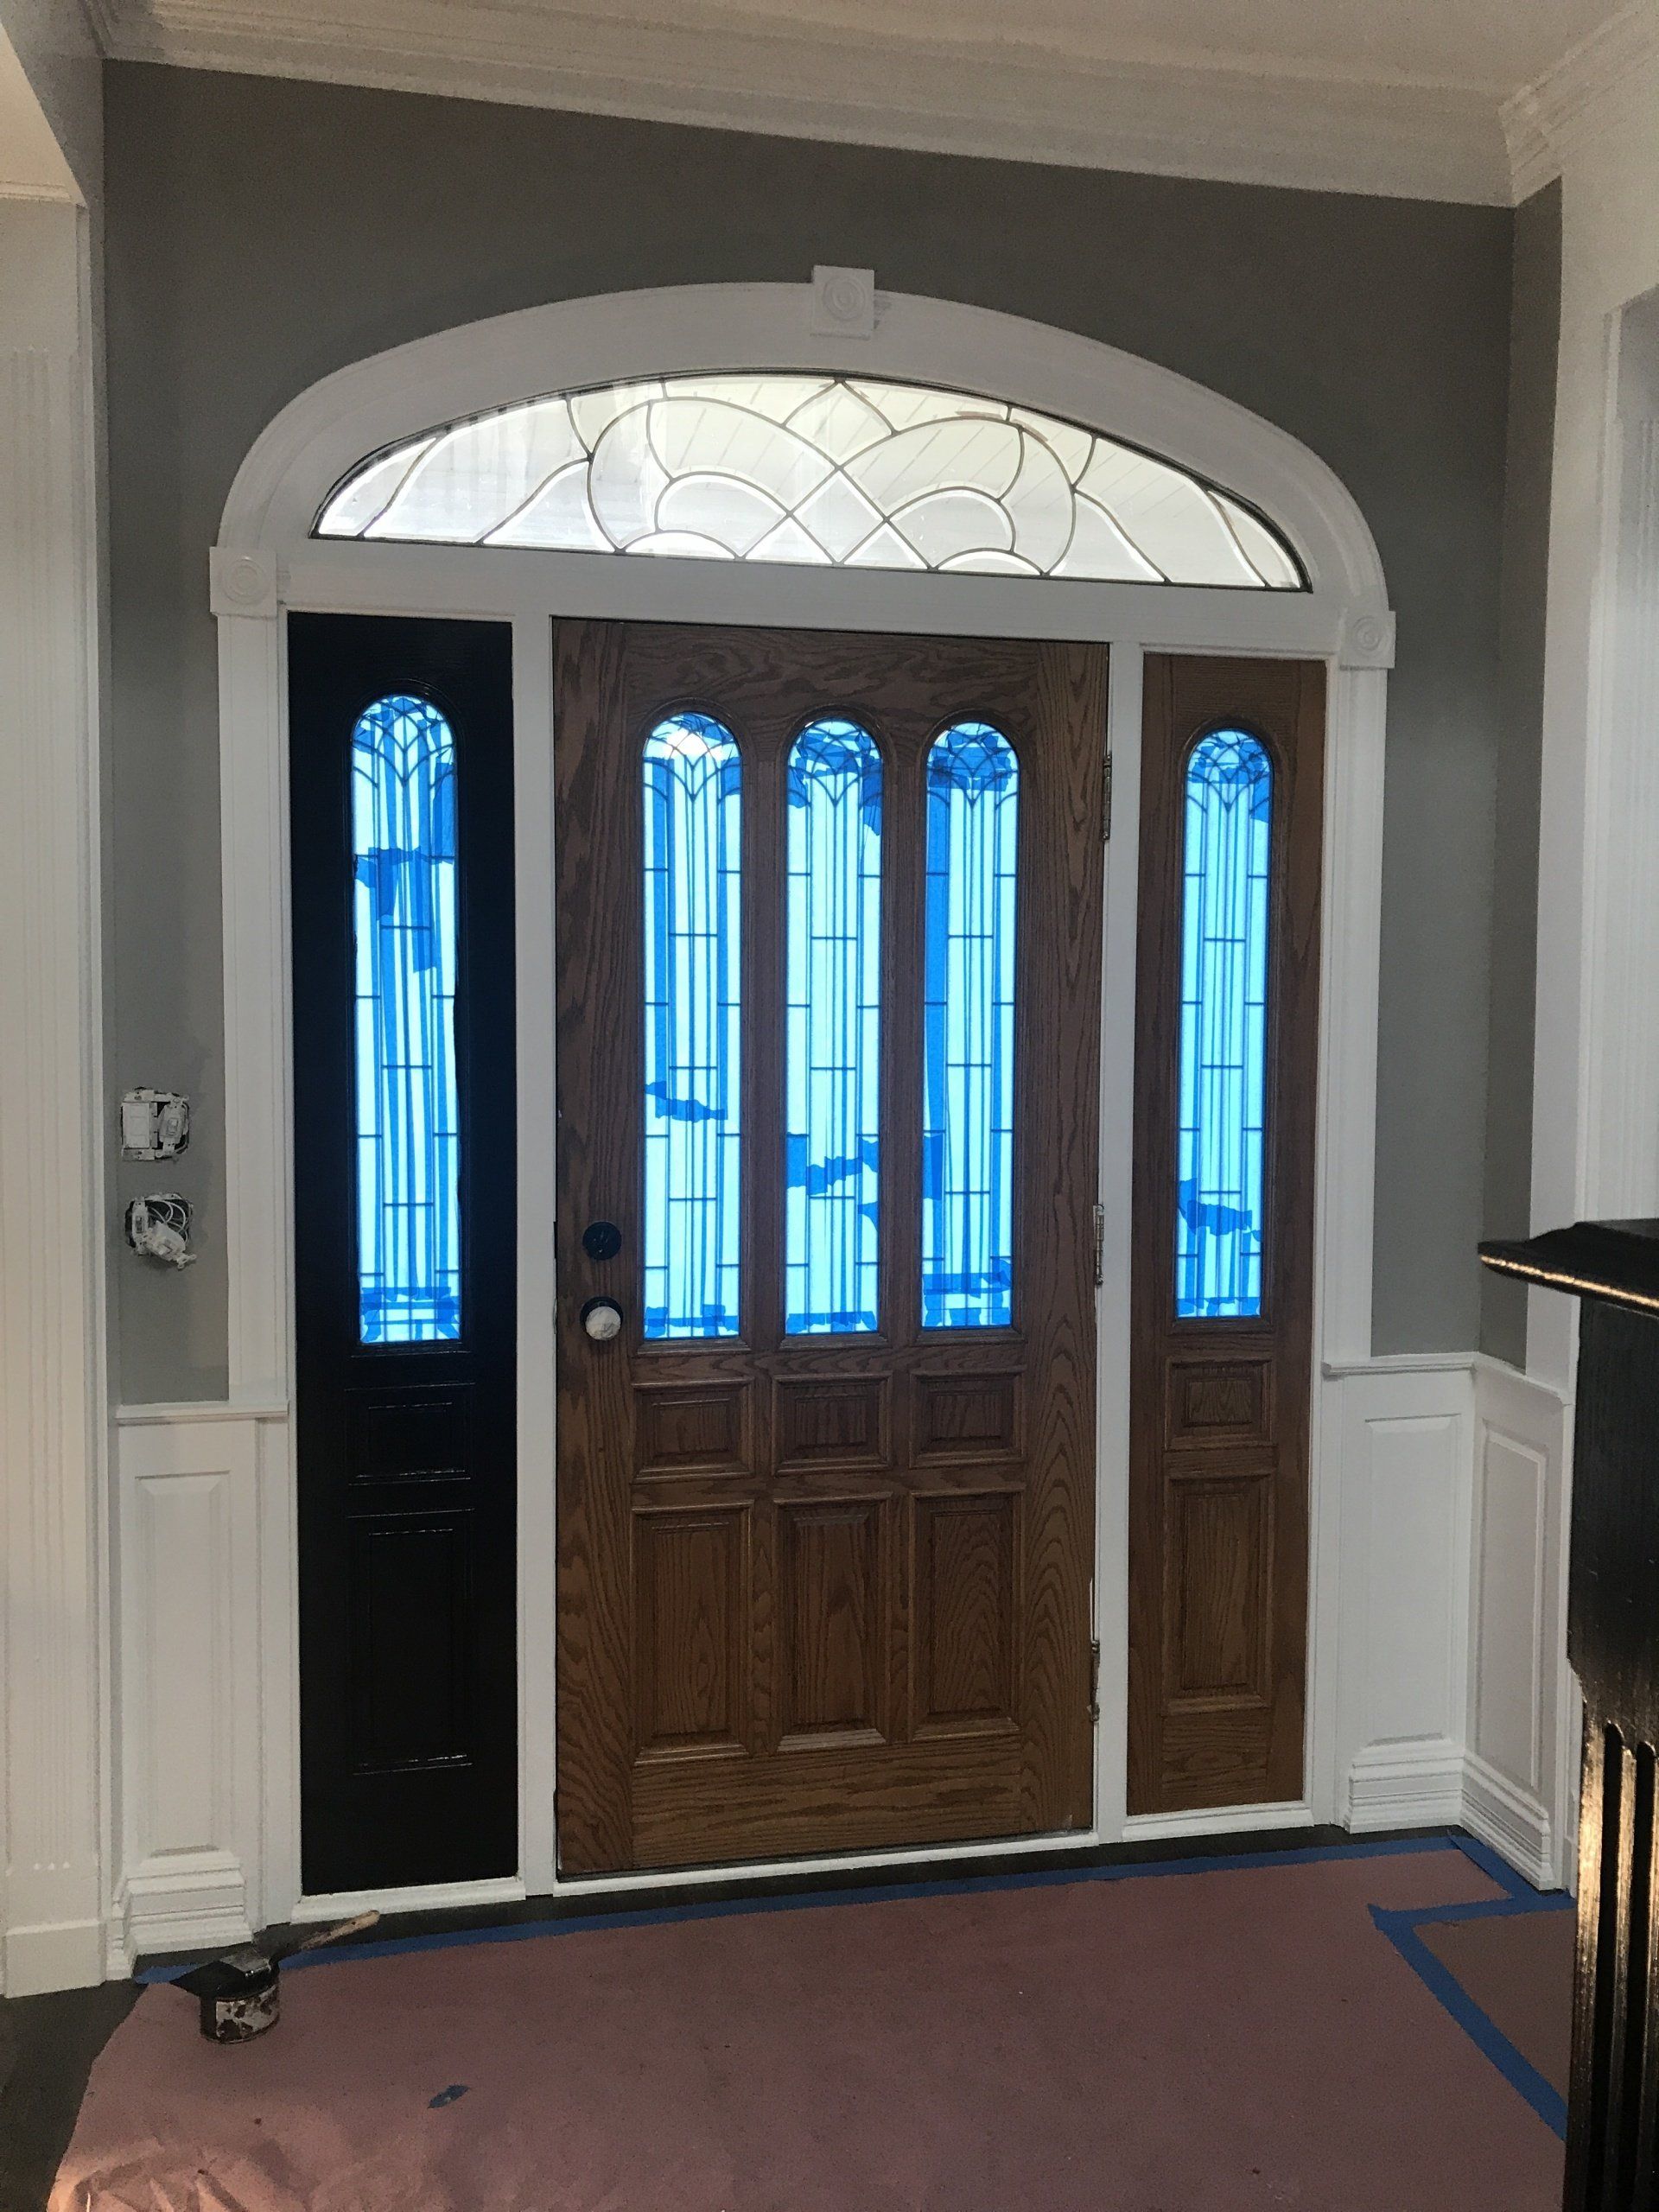 a wooden door with stained glass windows in a room